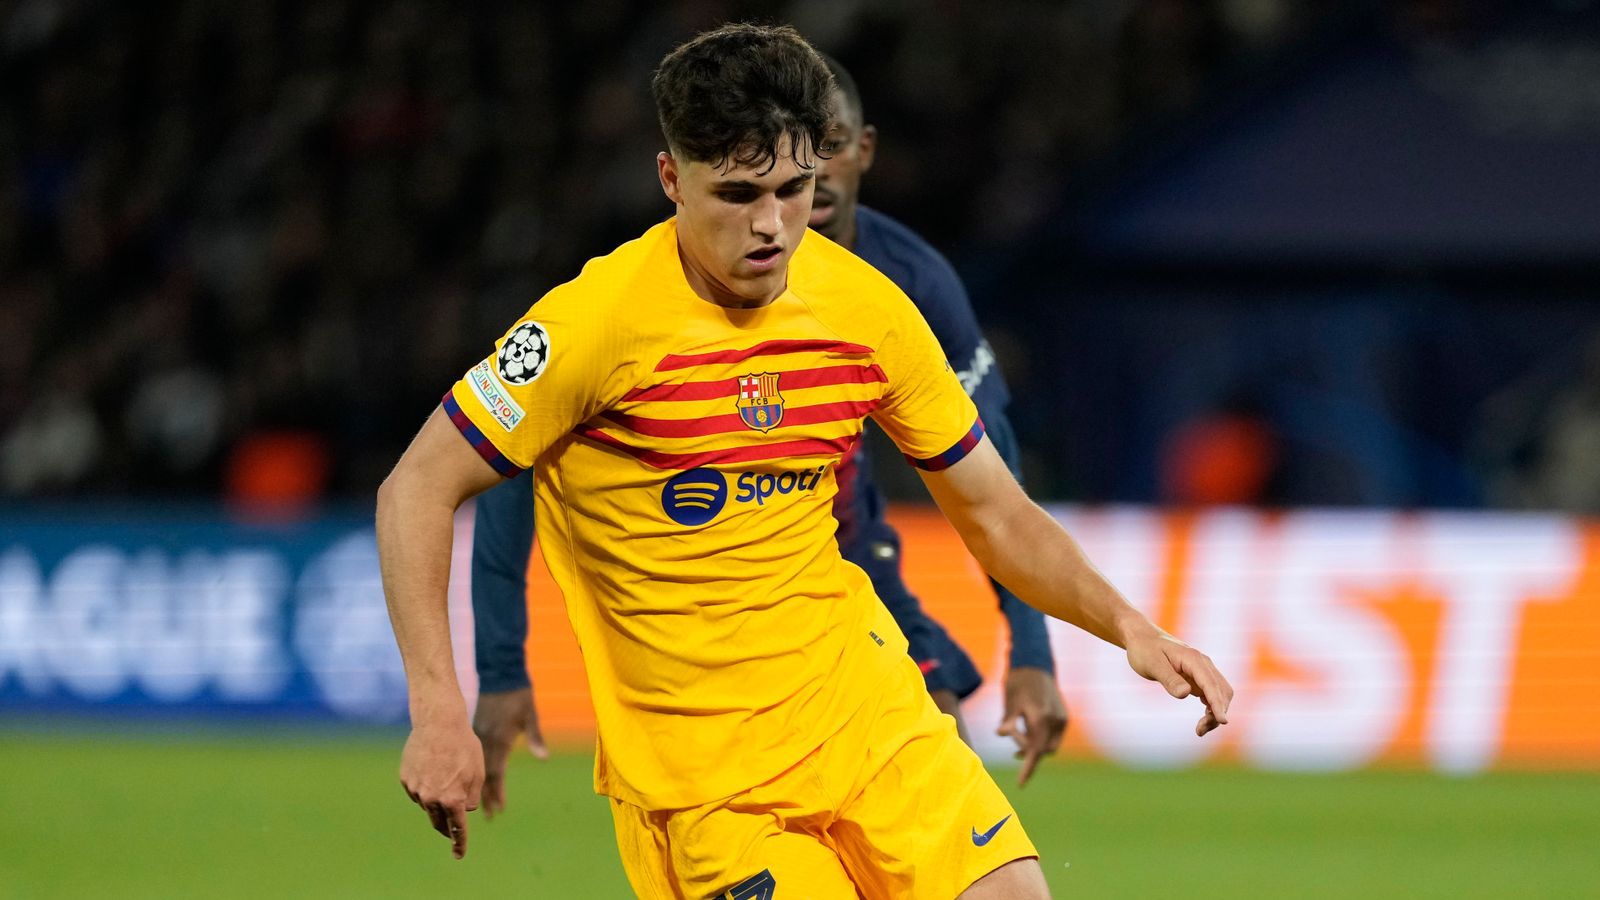 Pau Cubarsi shines for Barcelona and Antoine Griezmann remains crucial for Atletico Madrid- Champions League hits and misses | Football News | Sky Sports